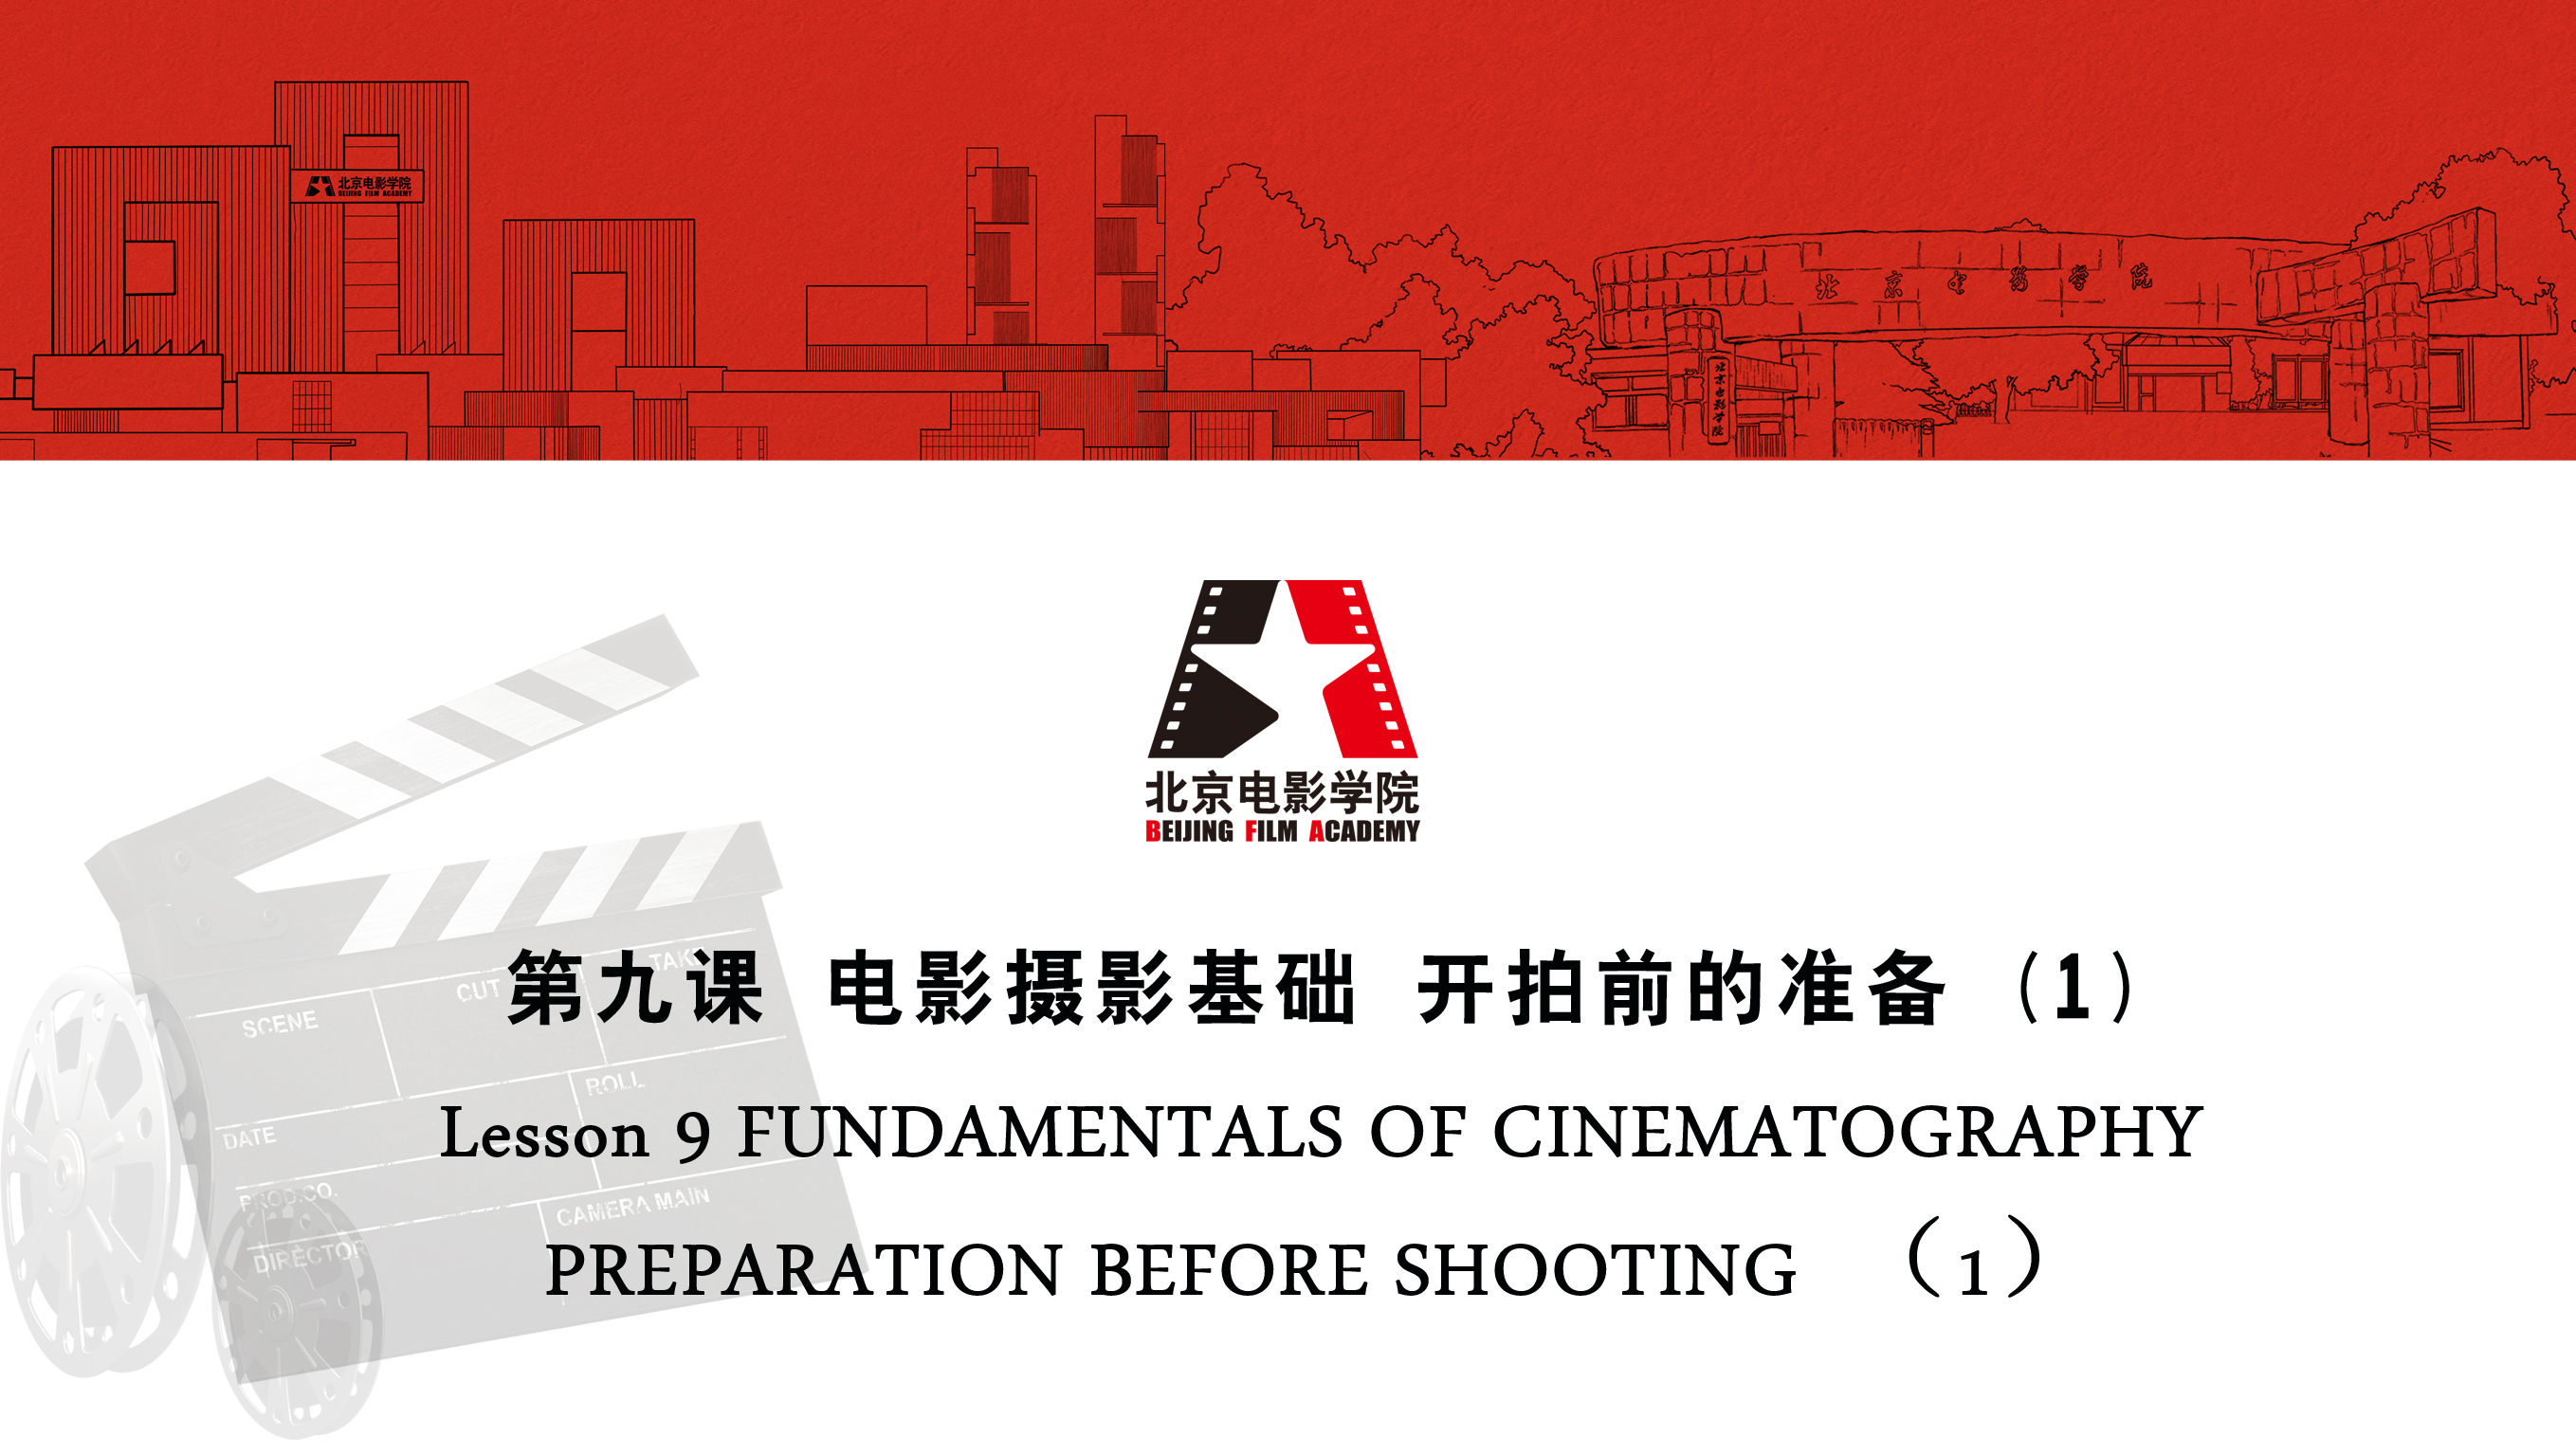 Lesson 9 FUNDAMENTALS OF CINEMATOGRAPHY PREPARATION BEFORE SHOOTING（1）